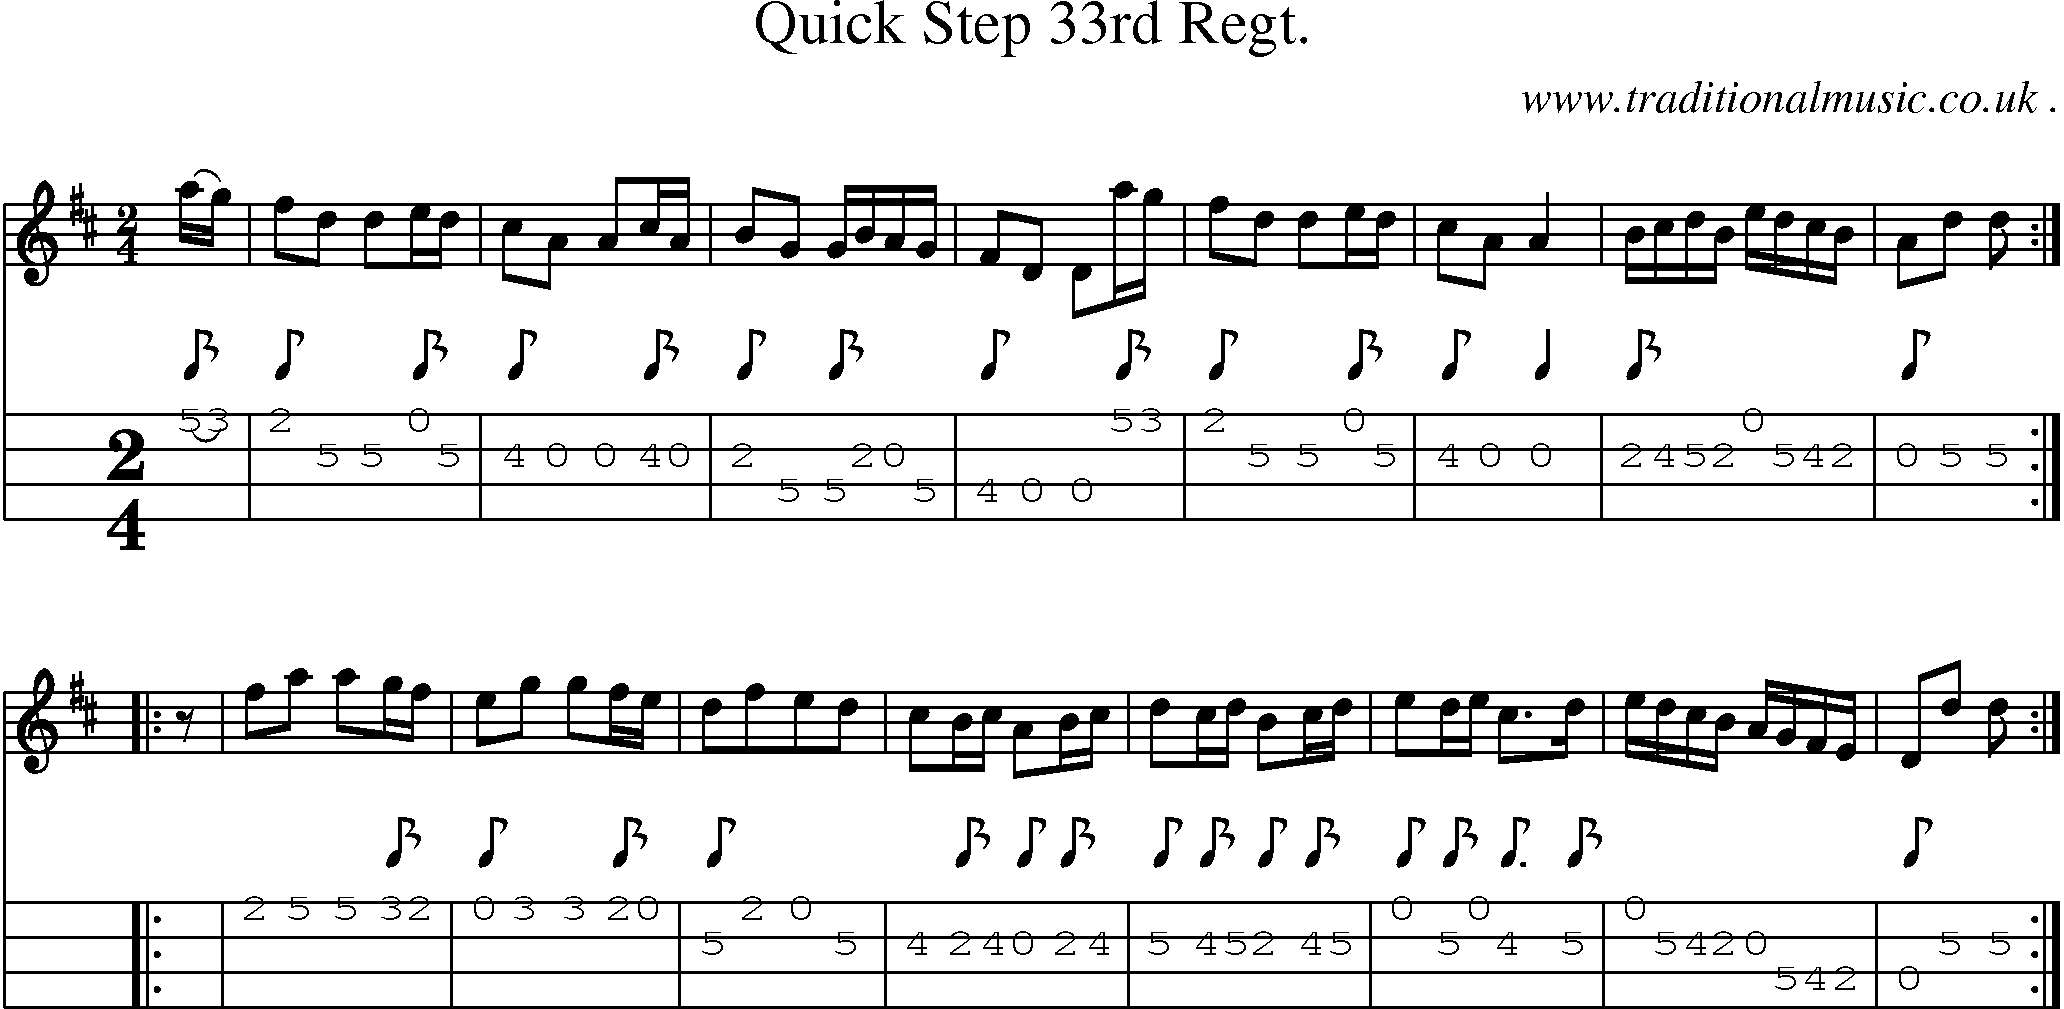 Sheet-music  score, Chords and Mandolin Tabs for Quick Step 33rd Regt